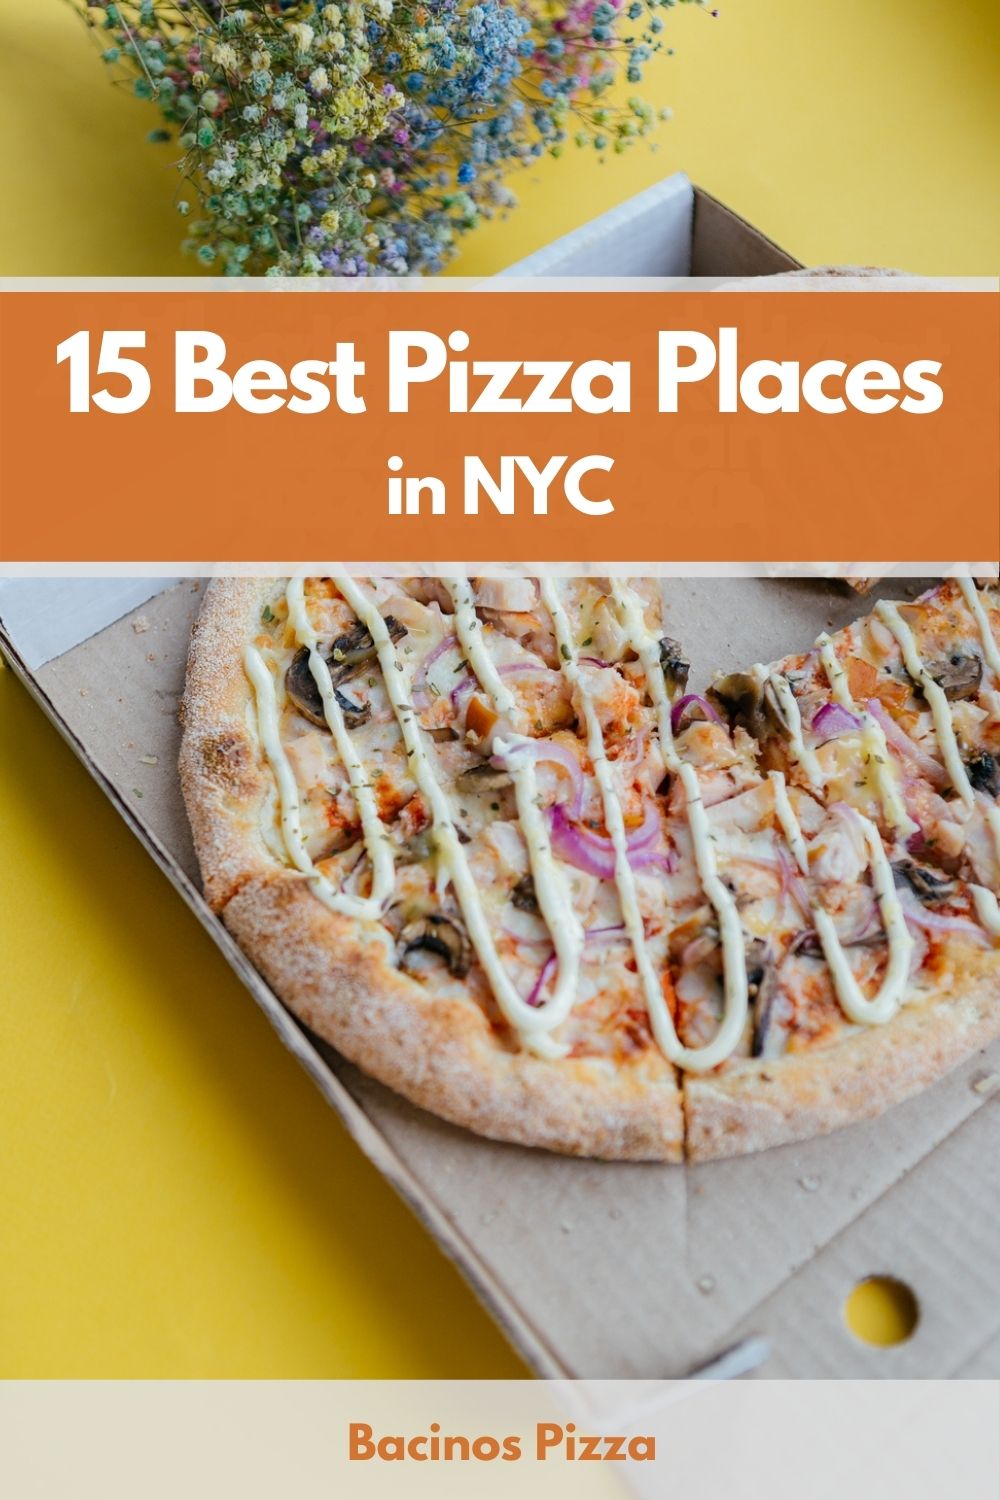 15 Best Pizza Places in NYC pin 2